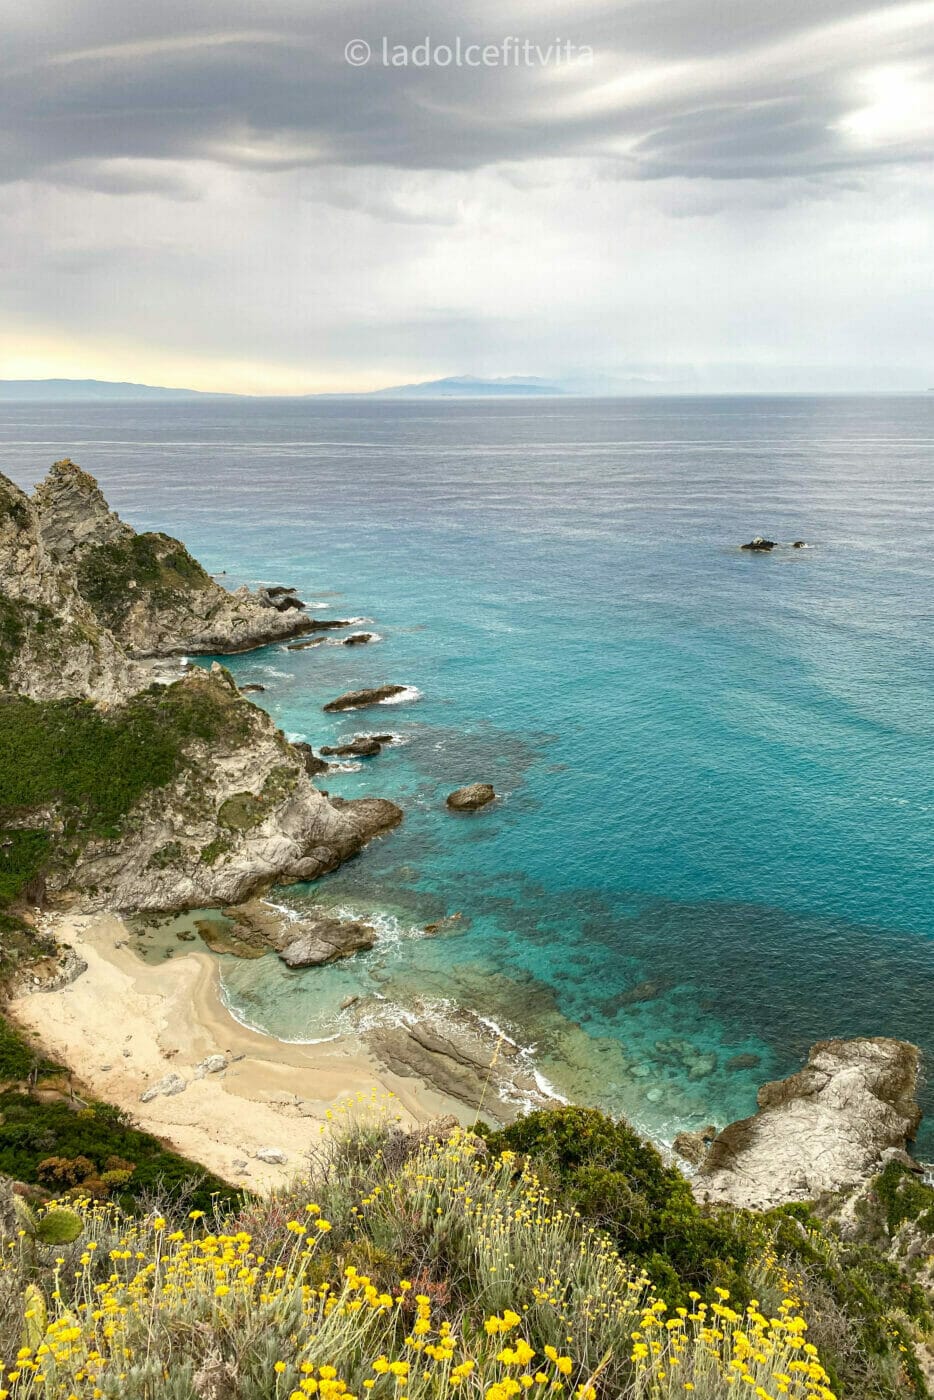 aerial view of the coves and inlets of Praia i Focu beach in Calabria, Italy